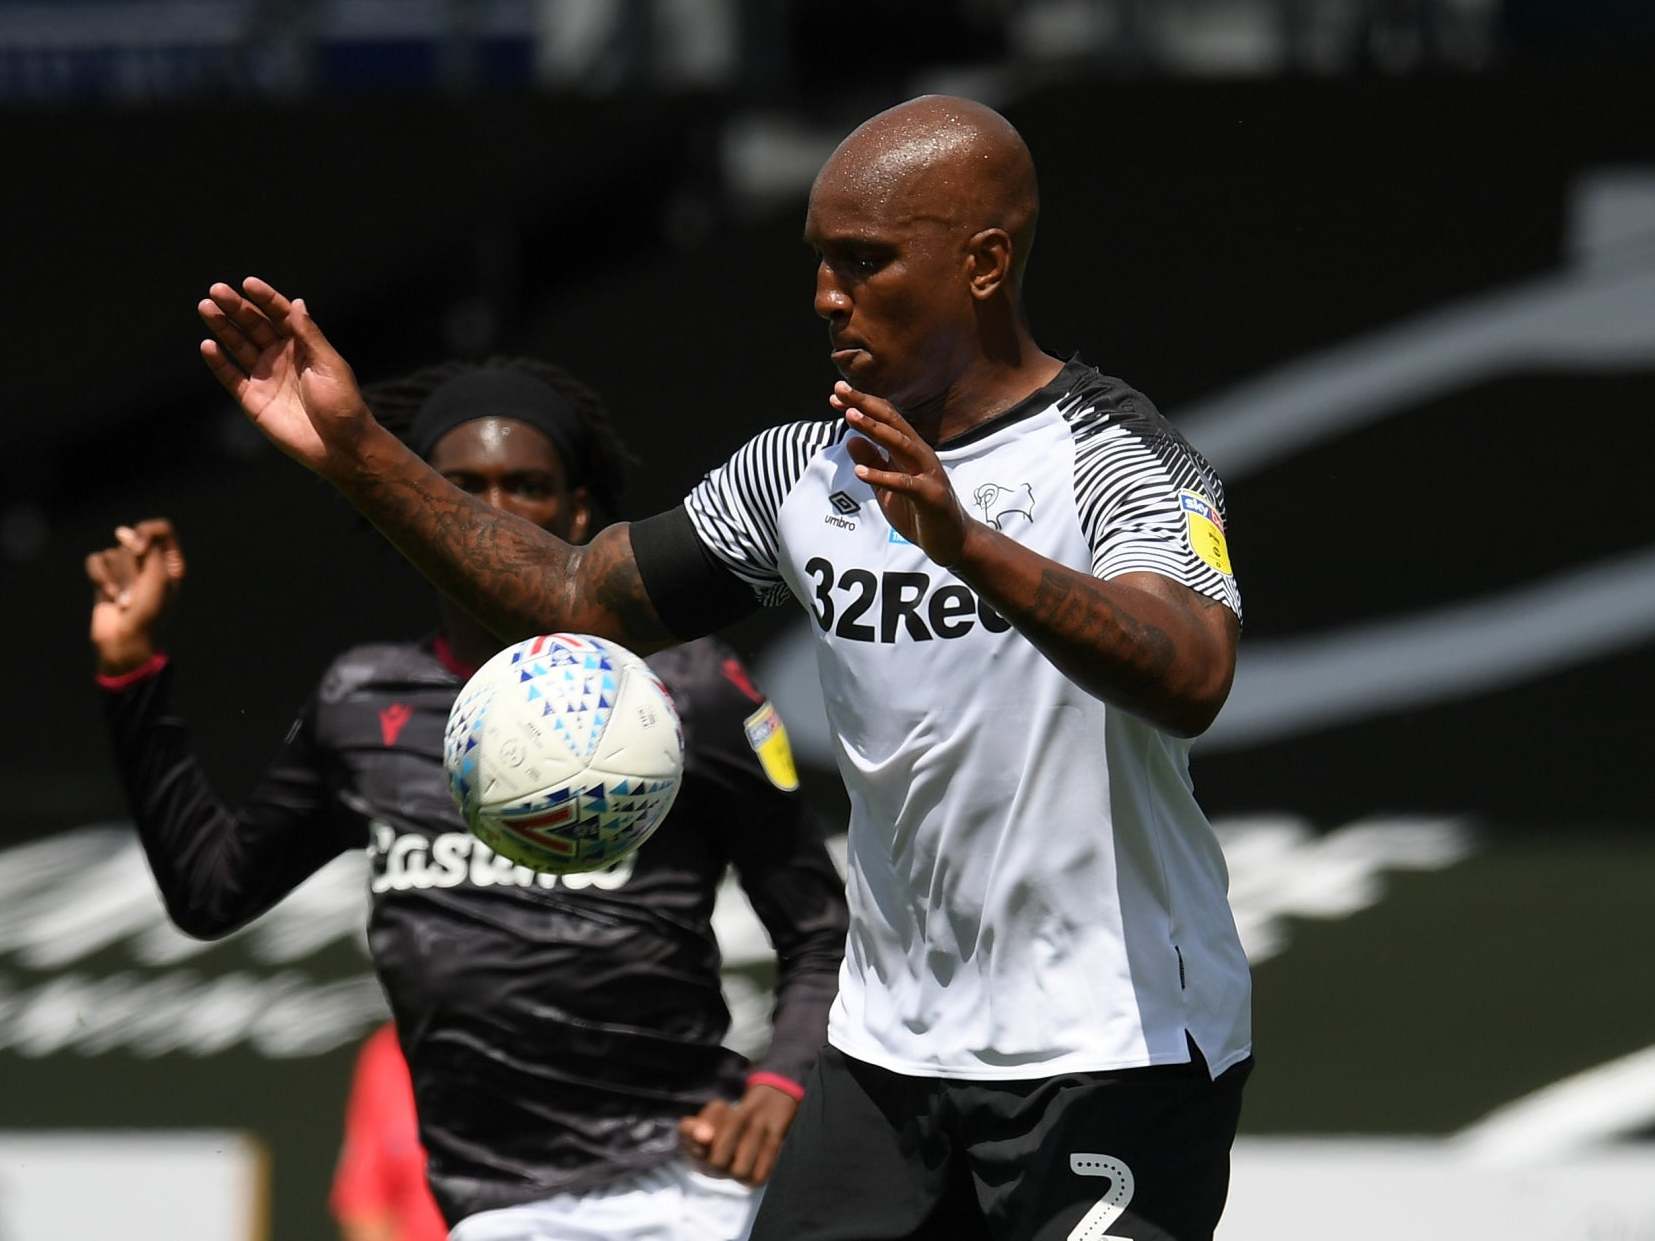 Andre Wisdom stabbing: Derby defender stable in hospital after attack in Liverpool